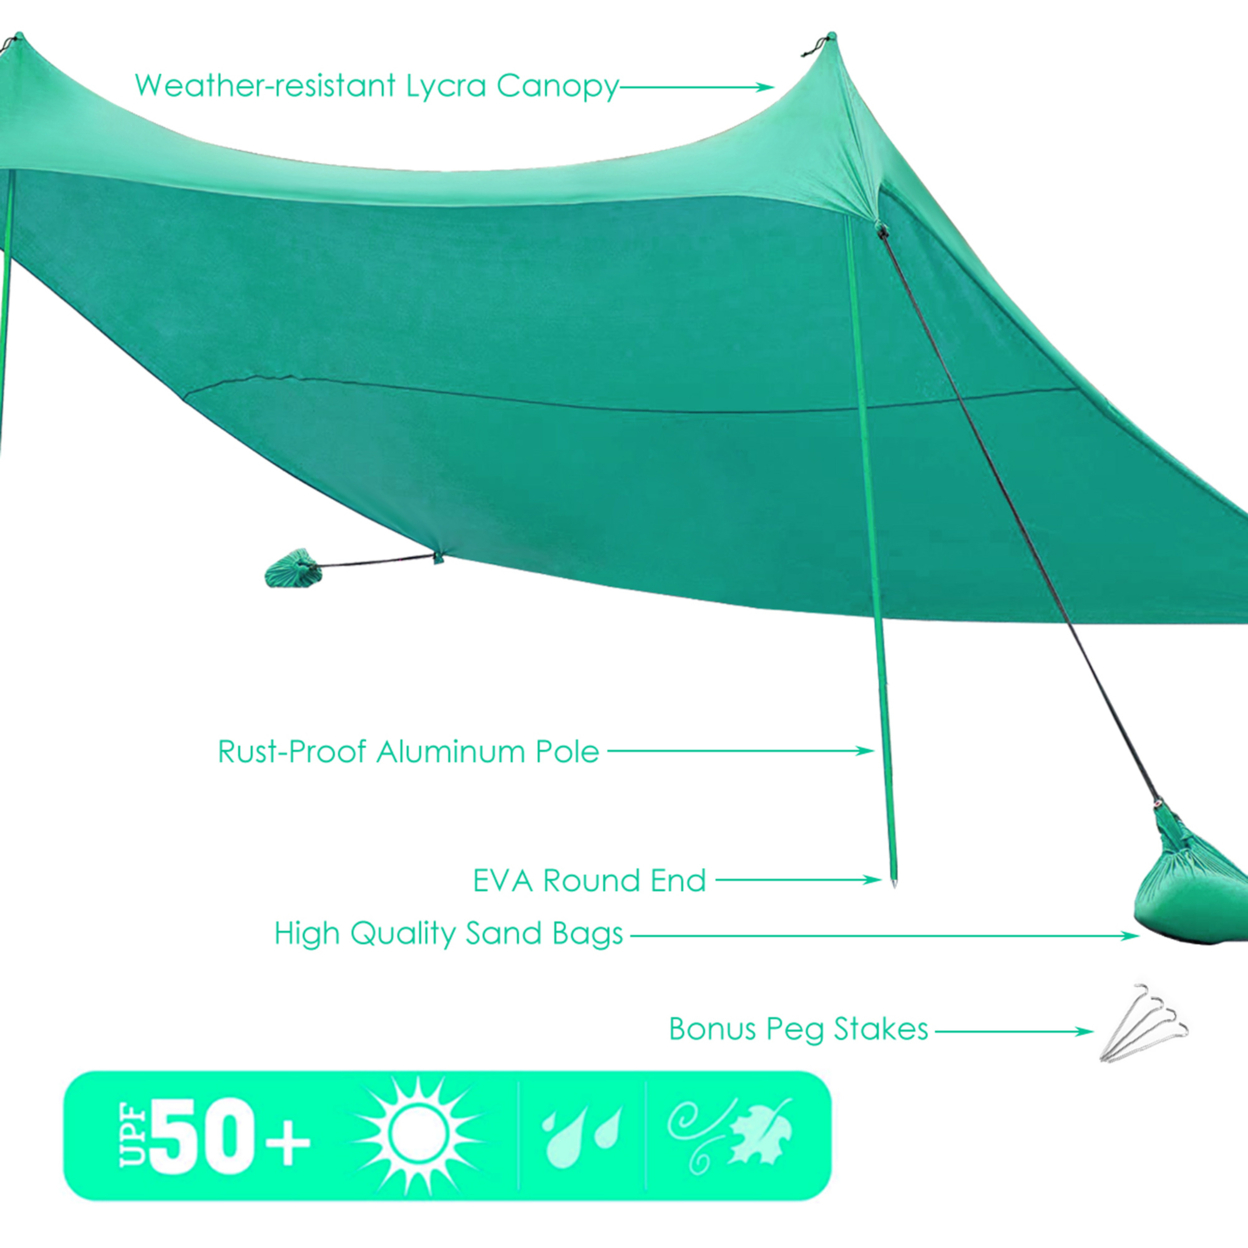 10x9 FT Portable Beach Canopy Tent Shelter W/ Sand Anchor Carry Bag - Green